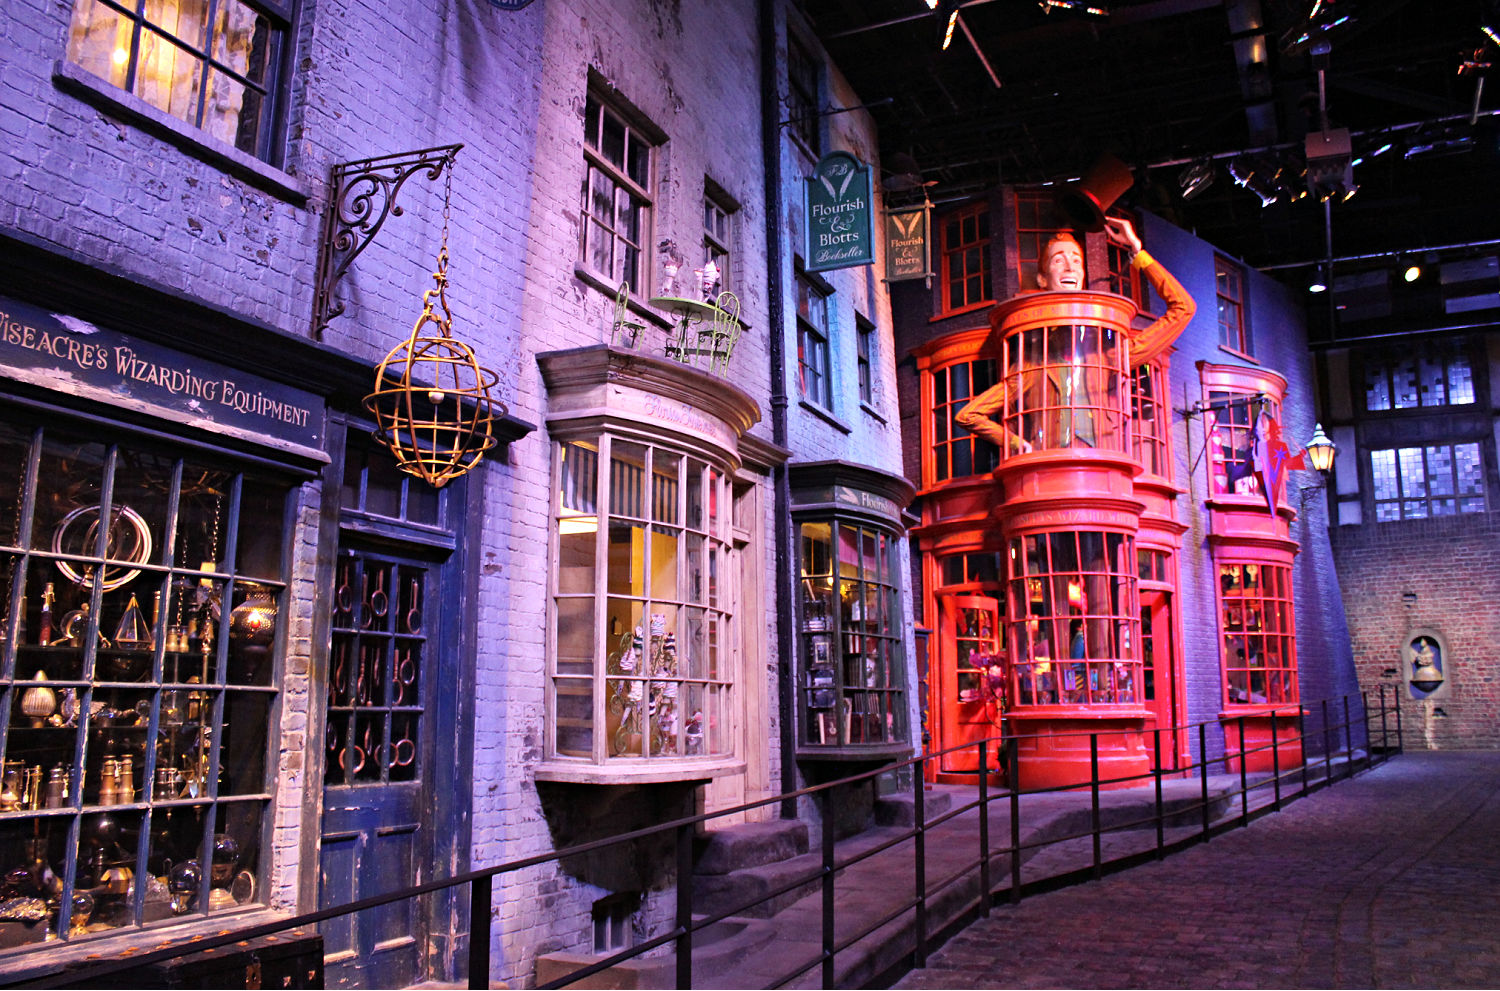 The shops of Diagon Alley at the Warner Bros Harry Potter studio tour - if you're visiting Harry Potter locations in London, you can't miss this